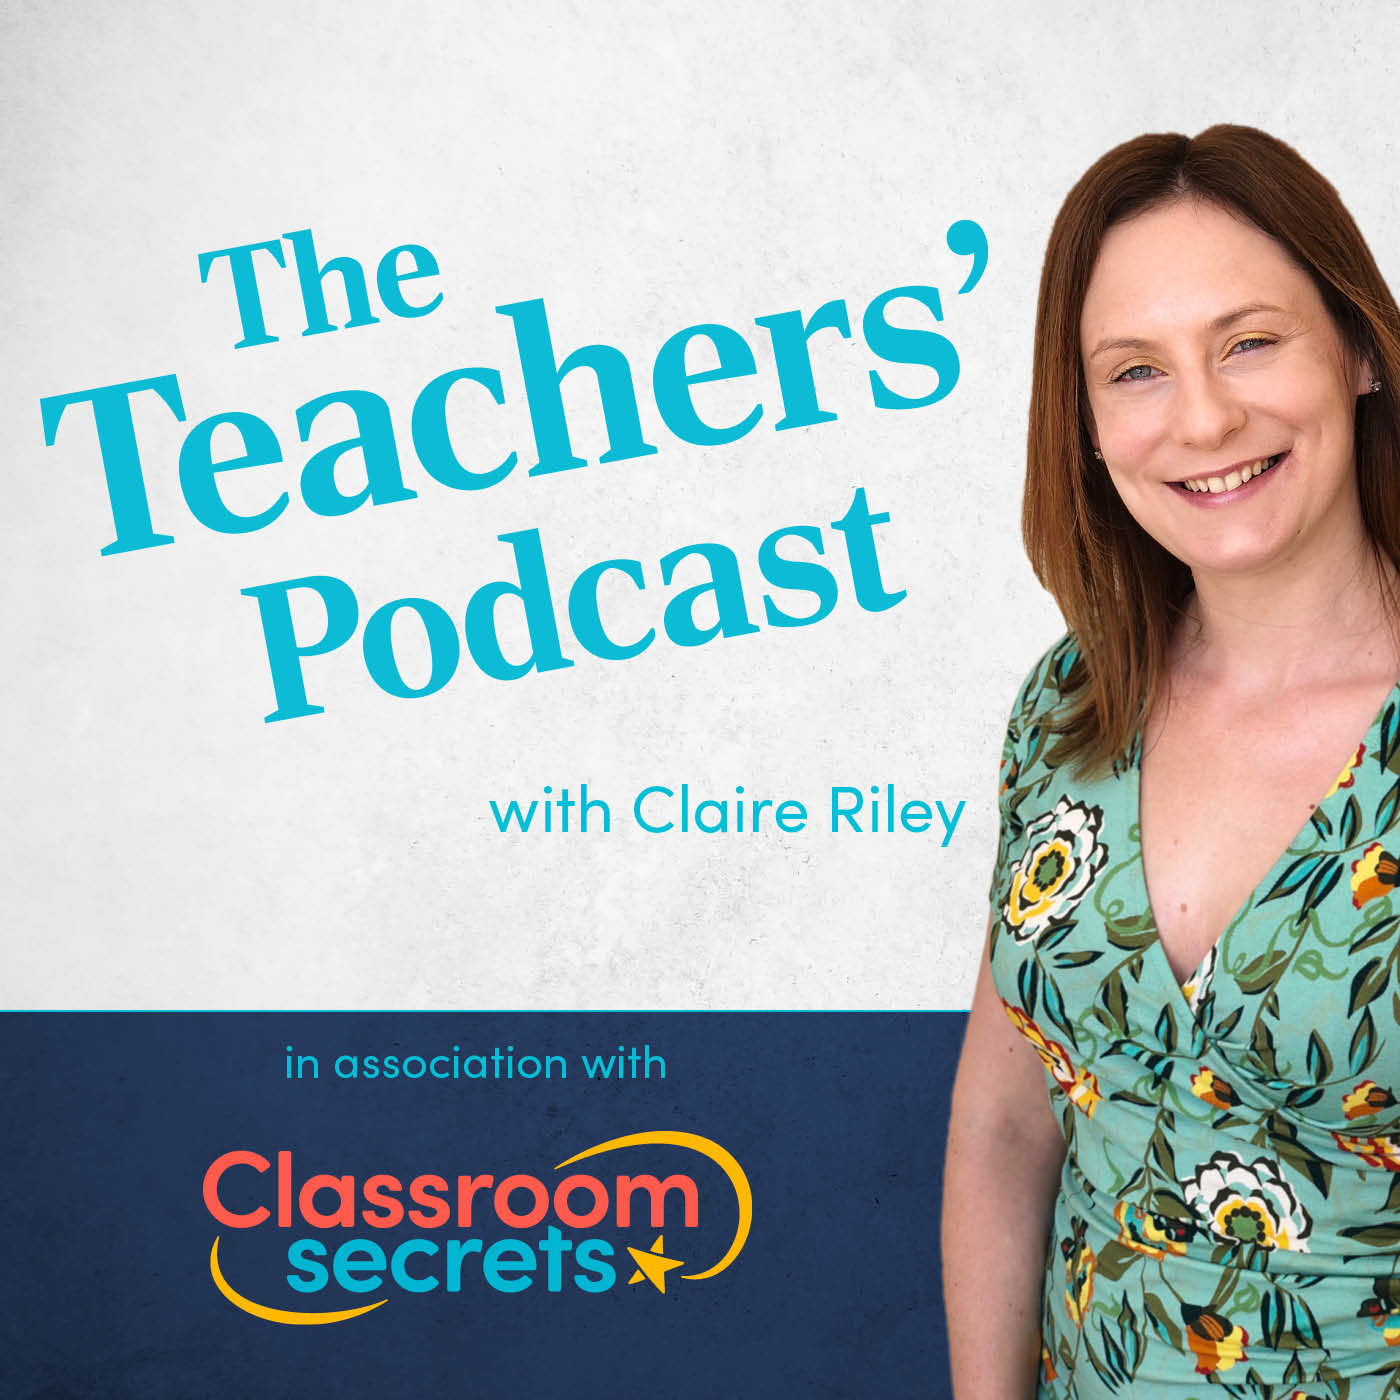 Lee Peckover (Classroom Secrets): Finding a love of education in EYFS away from classroom